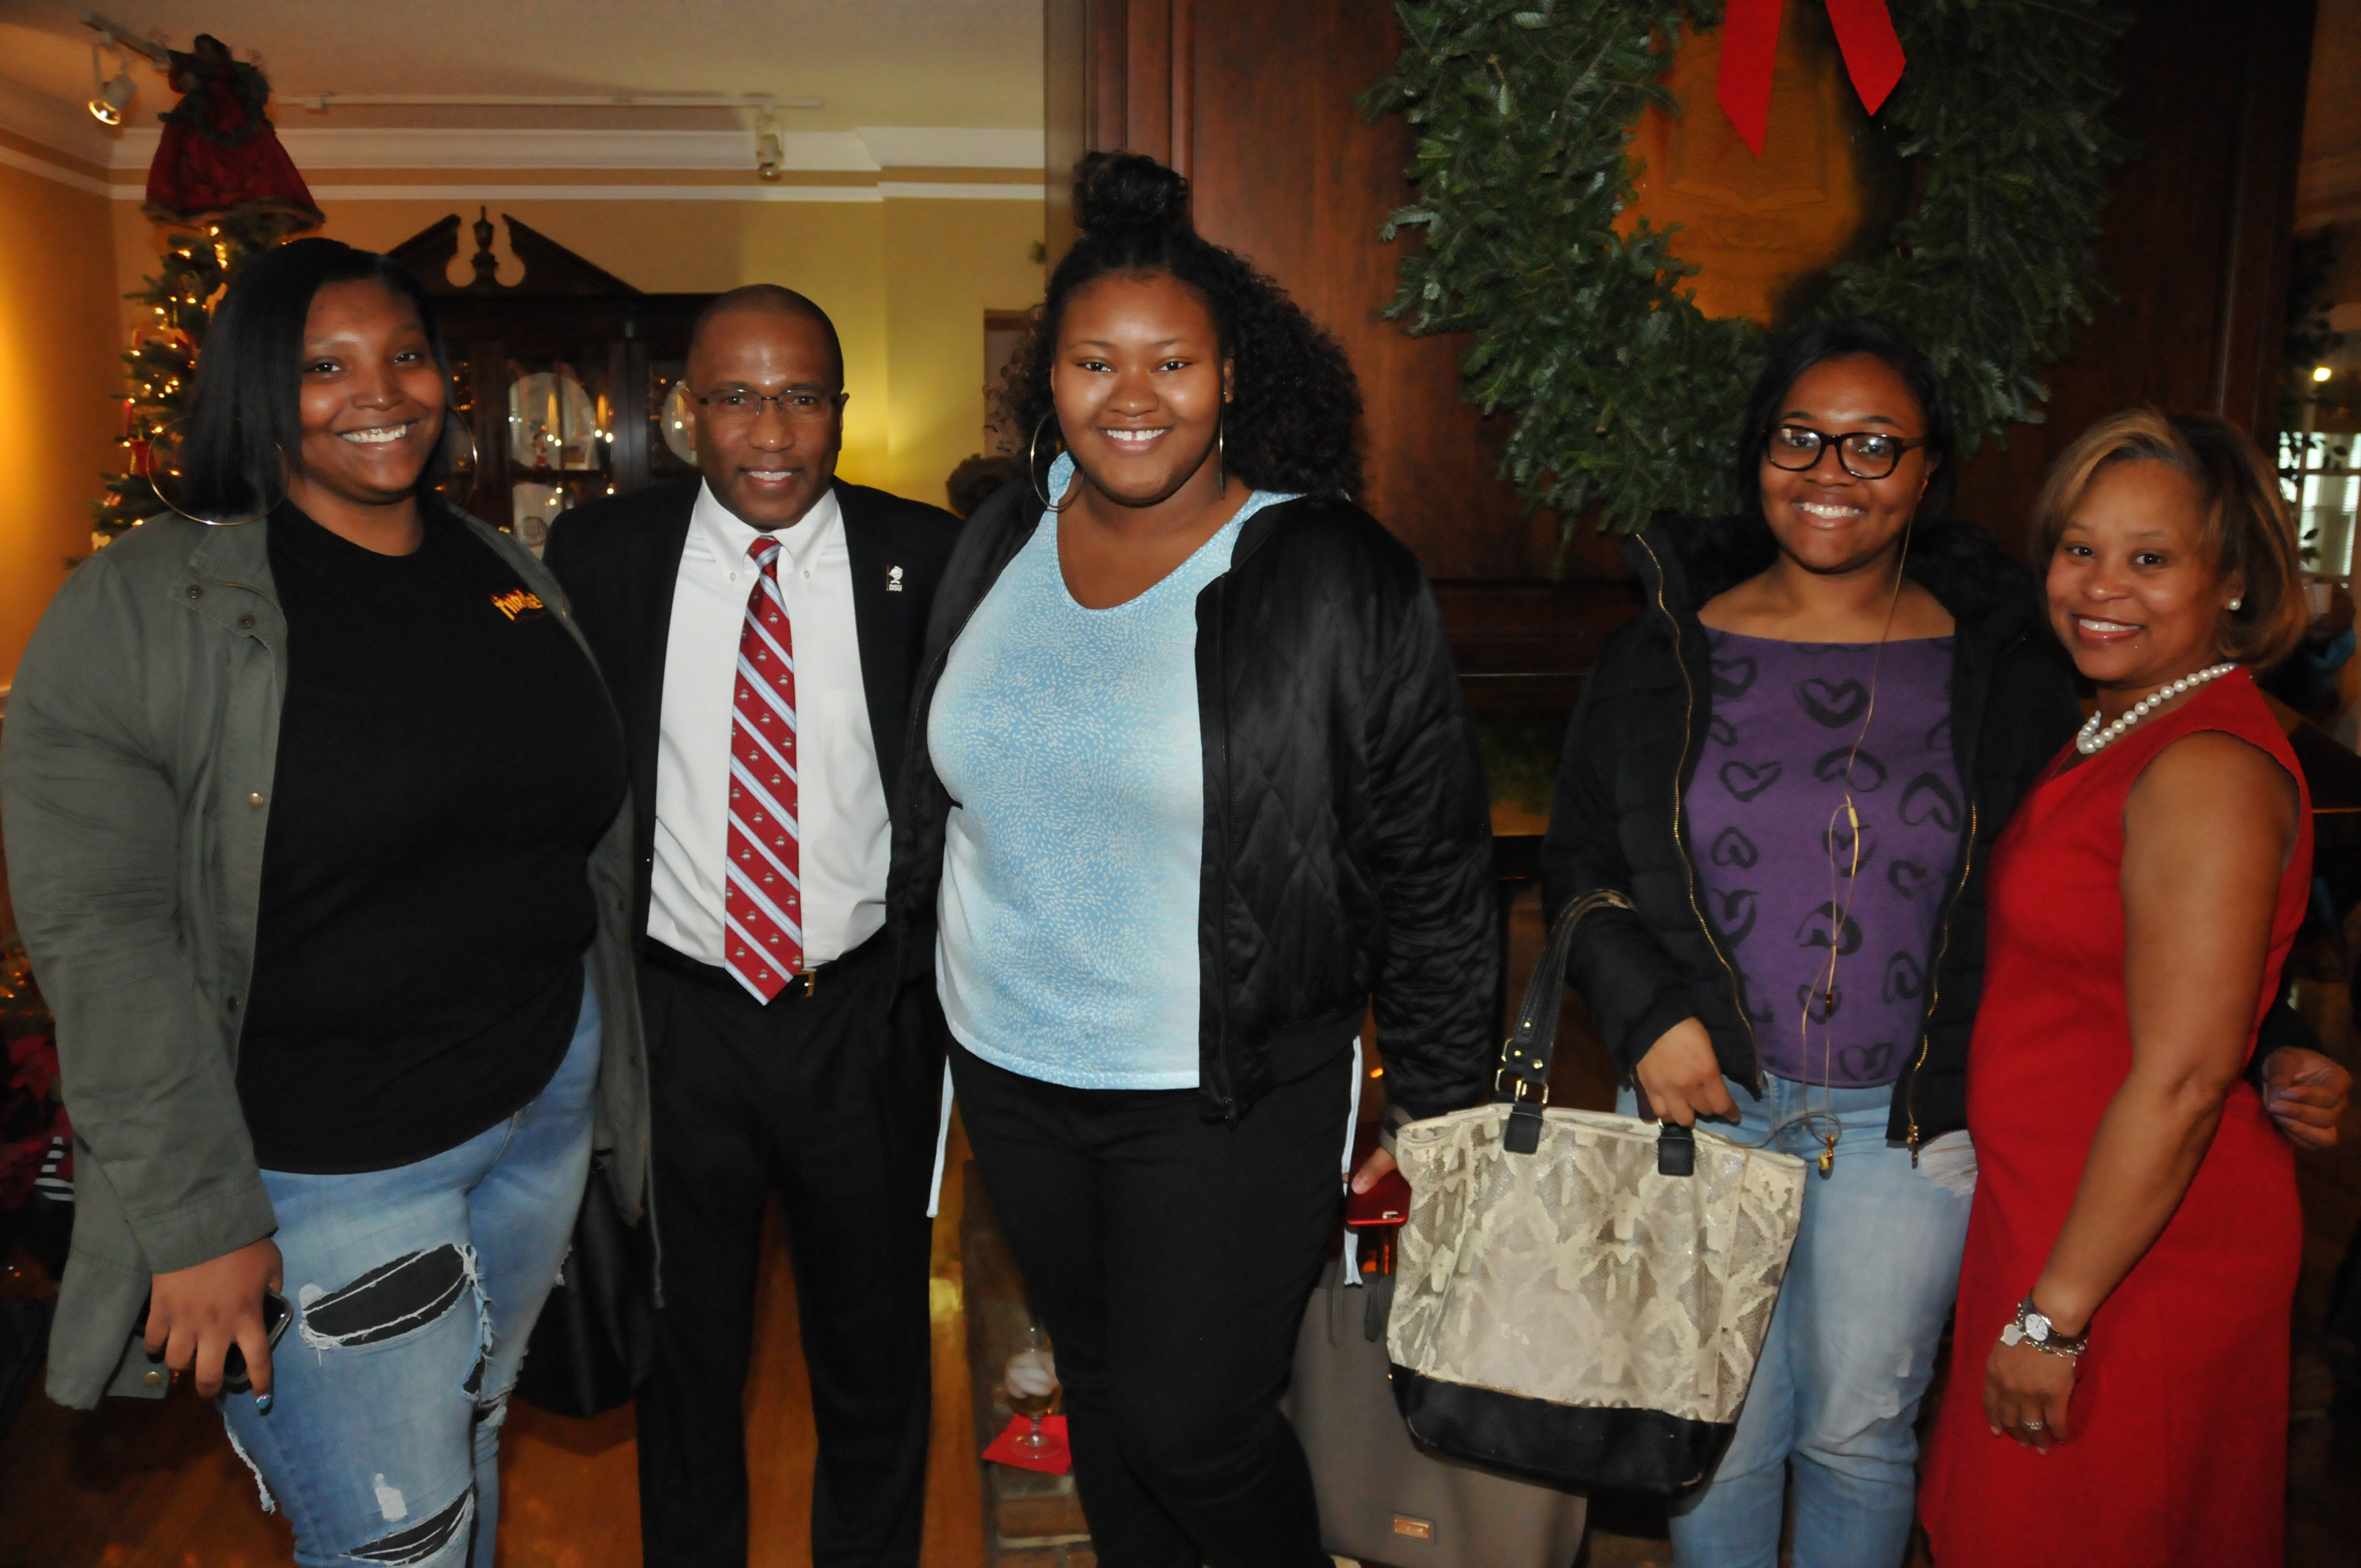 DSU President & Wife Welcome Students for Christmas Celebration